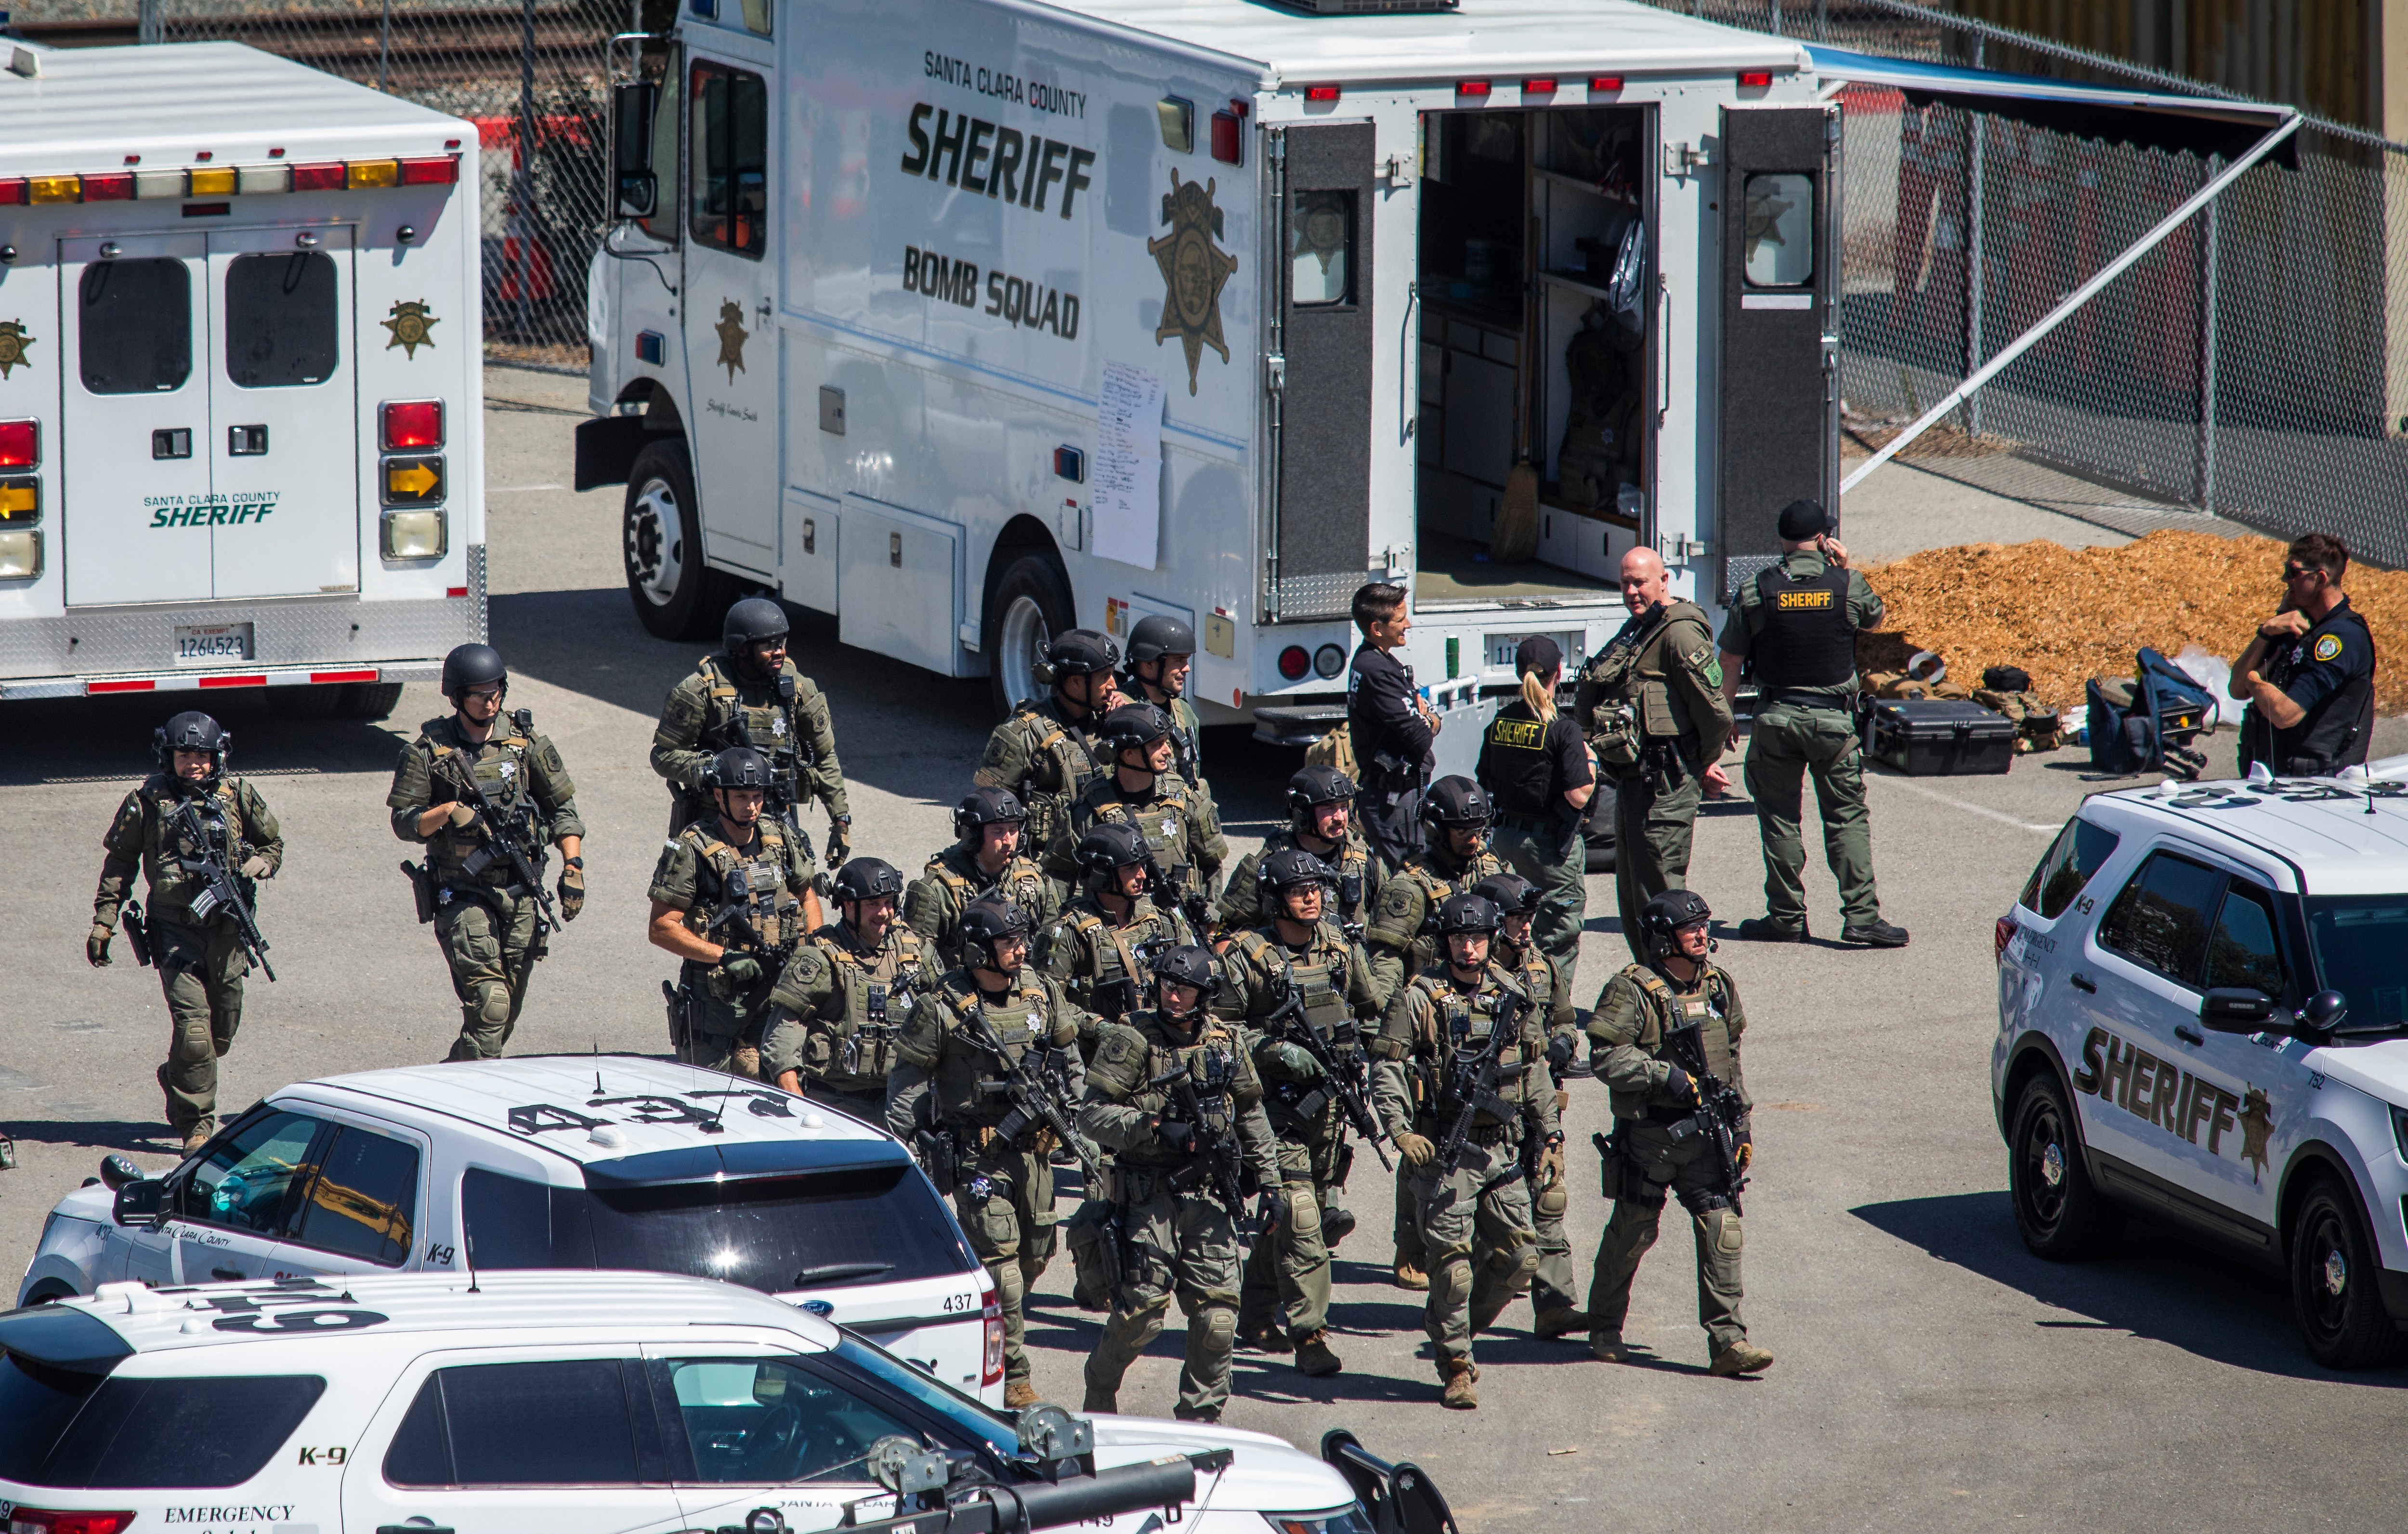 Tactical law enforcement officers move through the Valley Transportation Authority (VTA) light-rail yard where a mass shooting occurred on 26 May 2021.